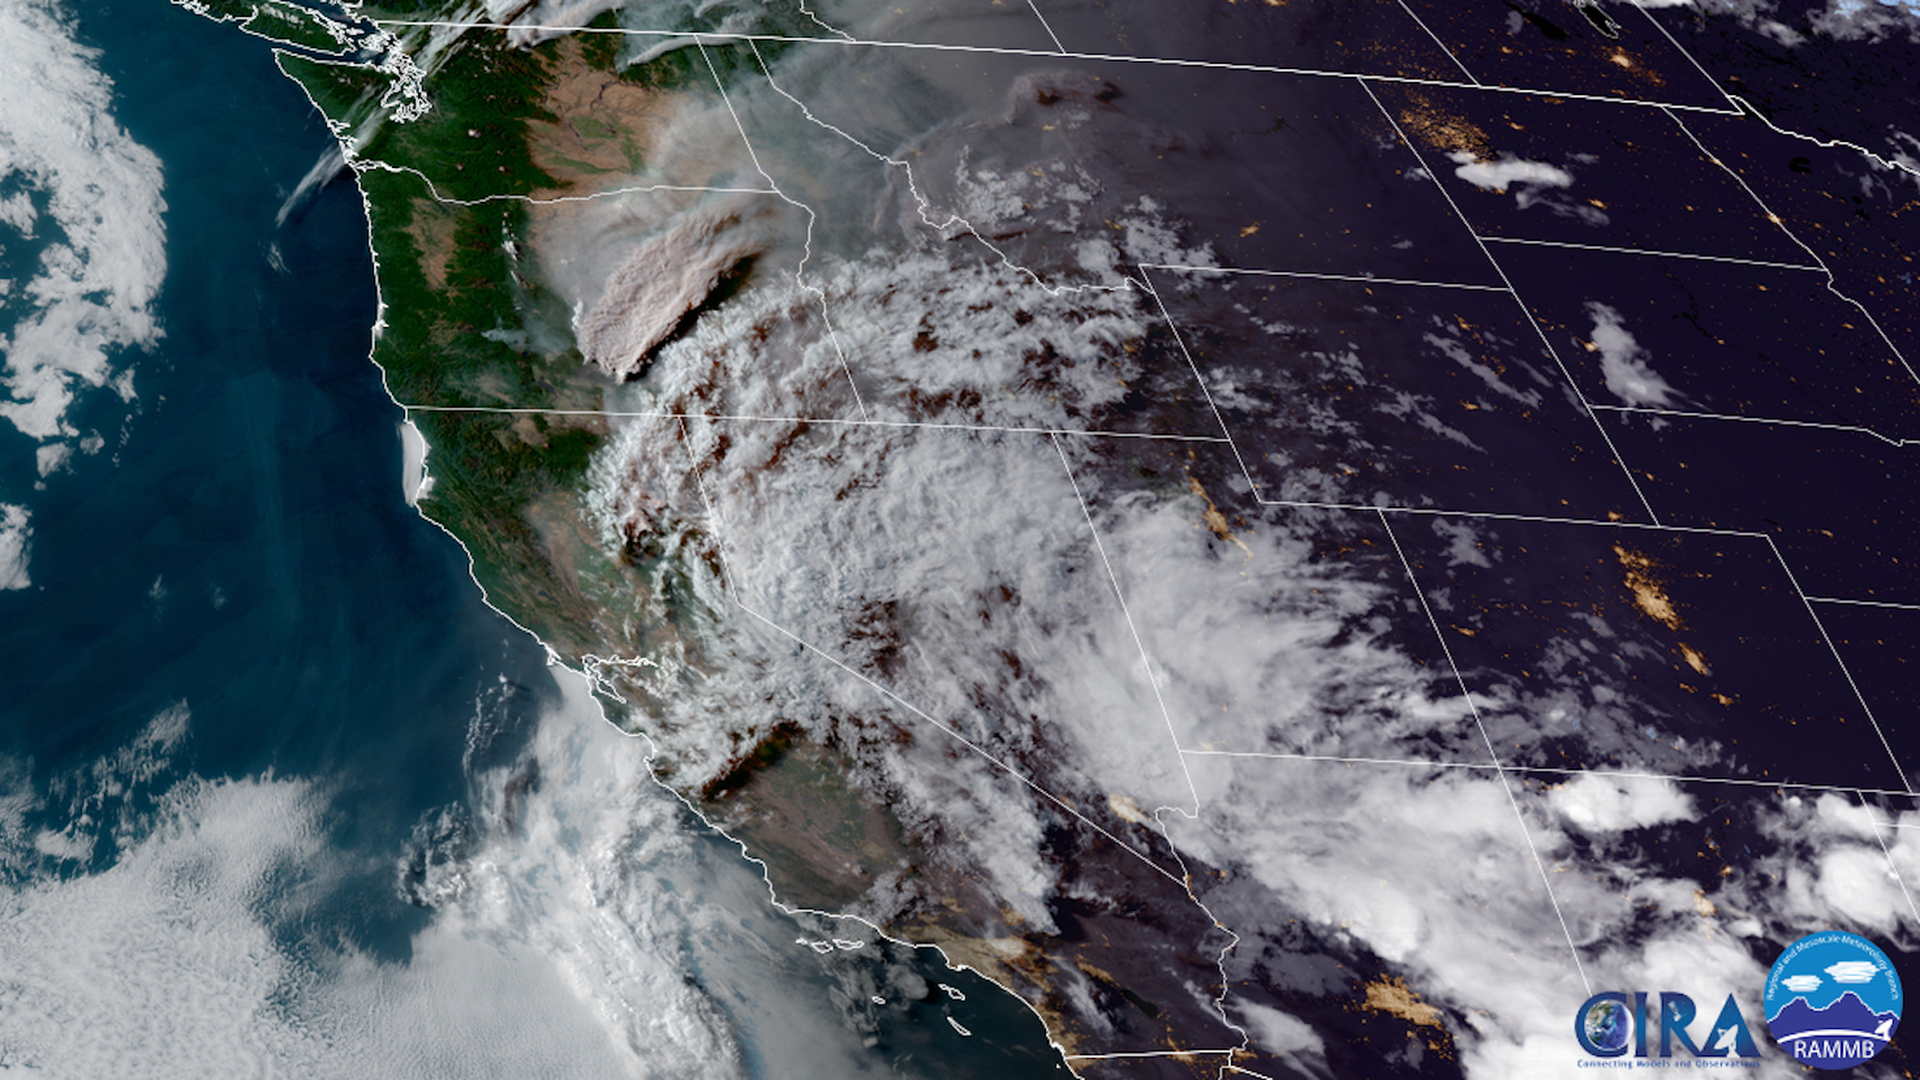 Satellite image showing wildfire smoke plume and thunderstorms from space.